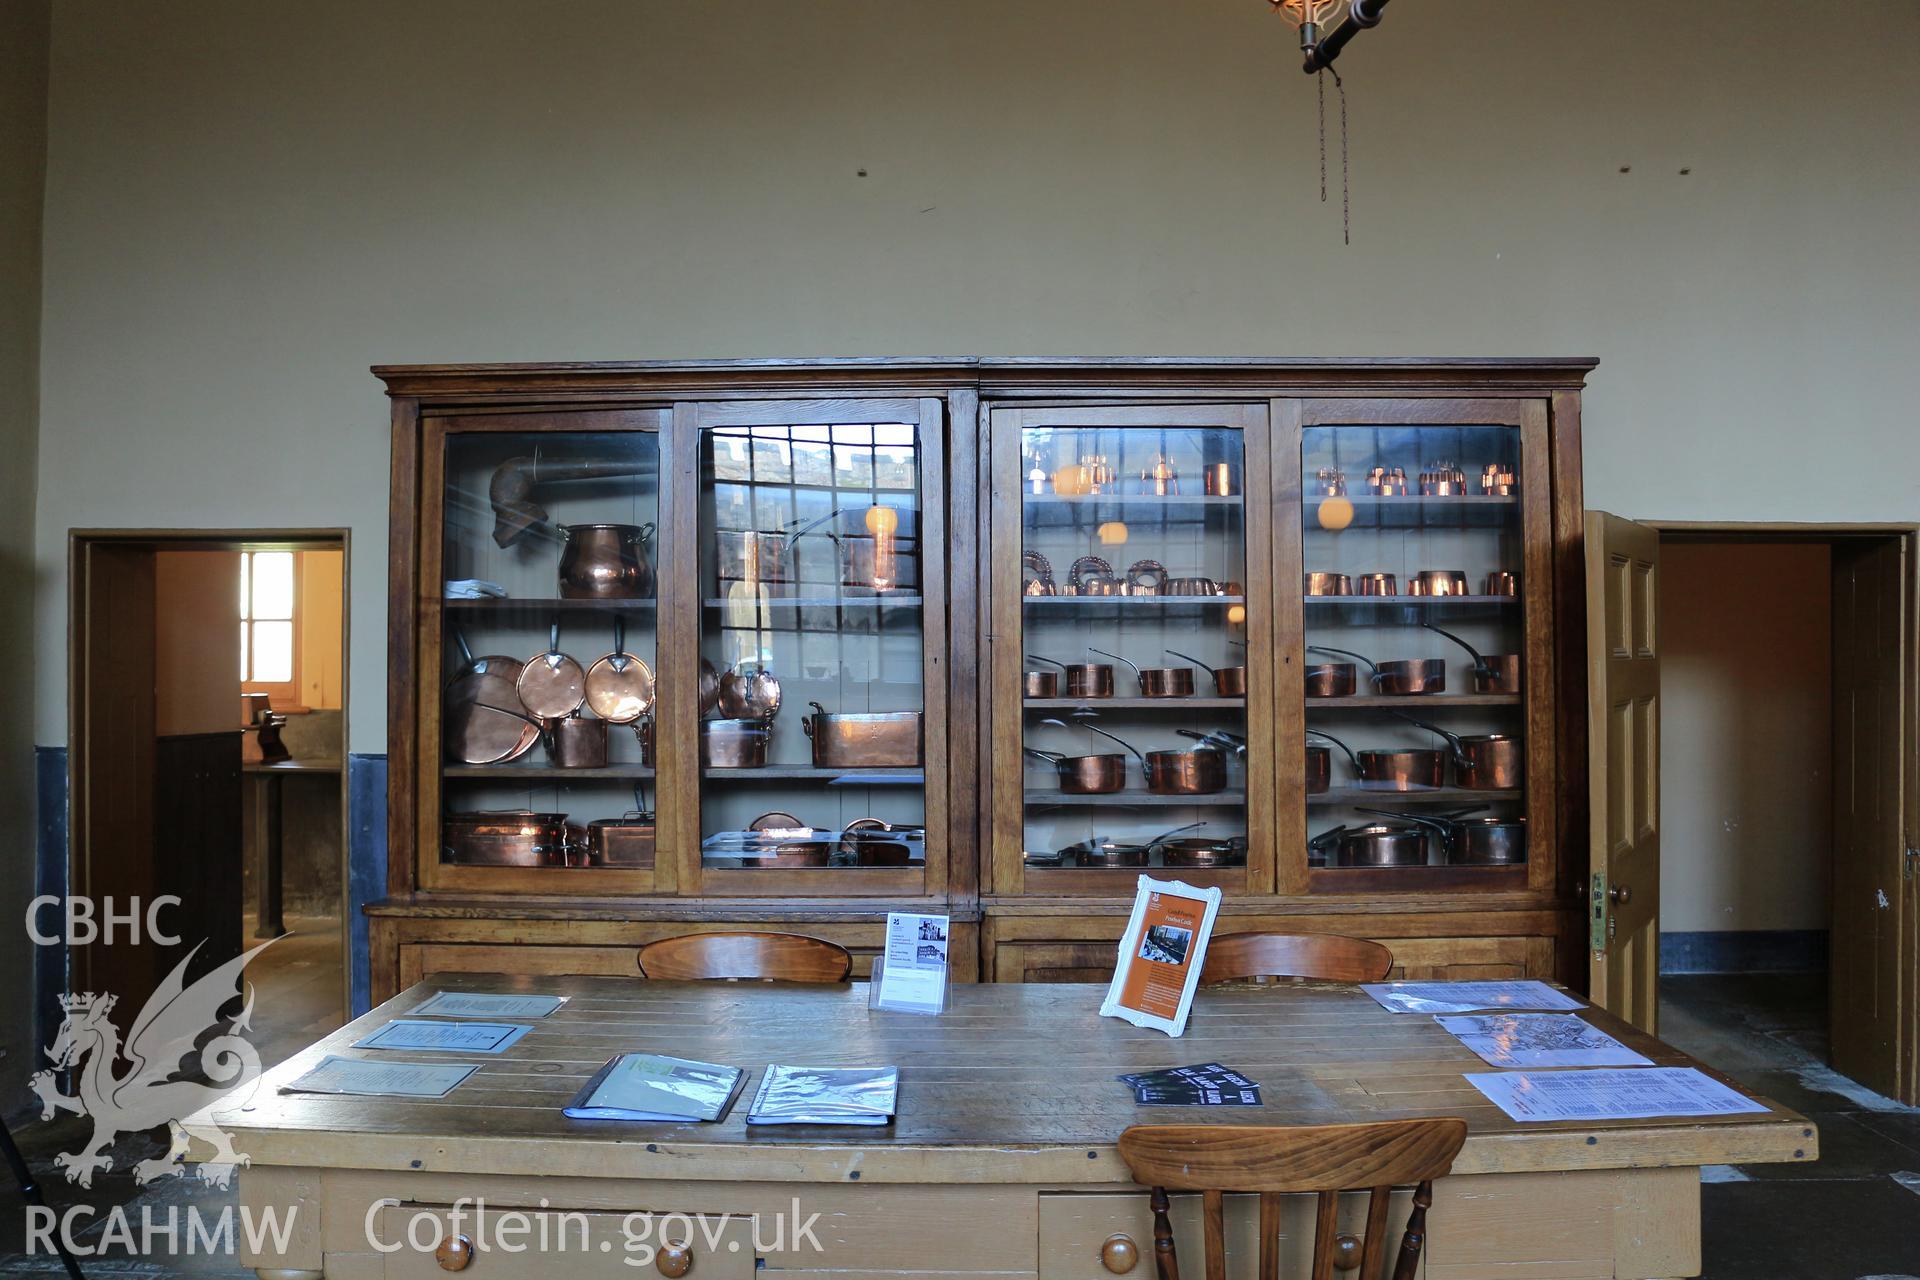 Photographic survey of Penrhyn Castle, Bangor. Kitchens, table and cabinet with copper pots.